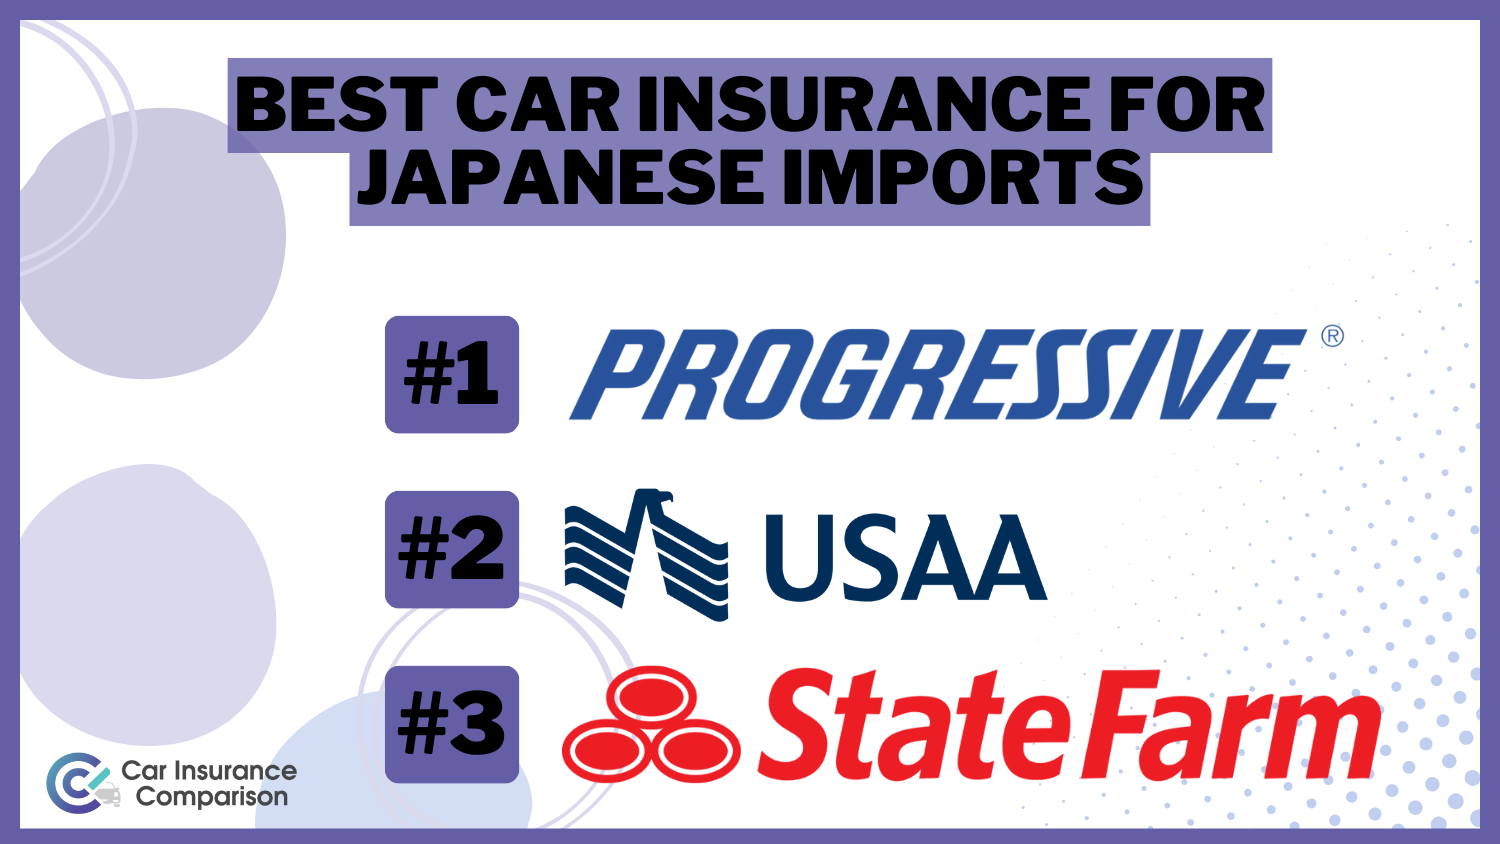 Progressive, USAA, and State Farm: Best Car Insurance for Japanese Imports